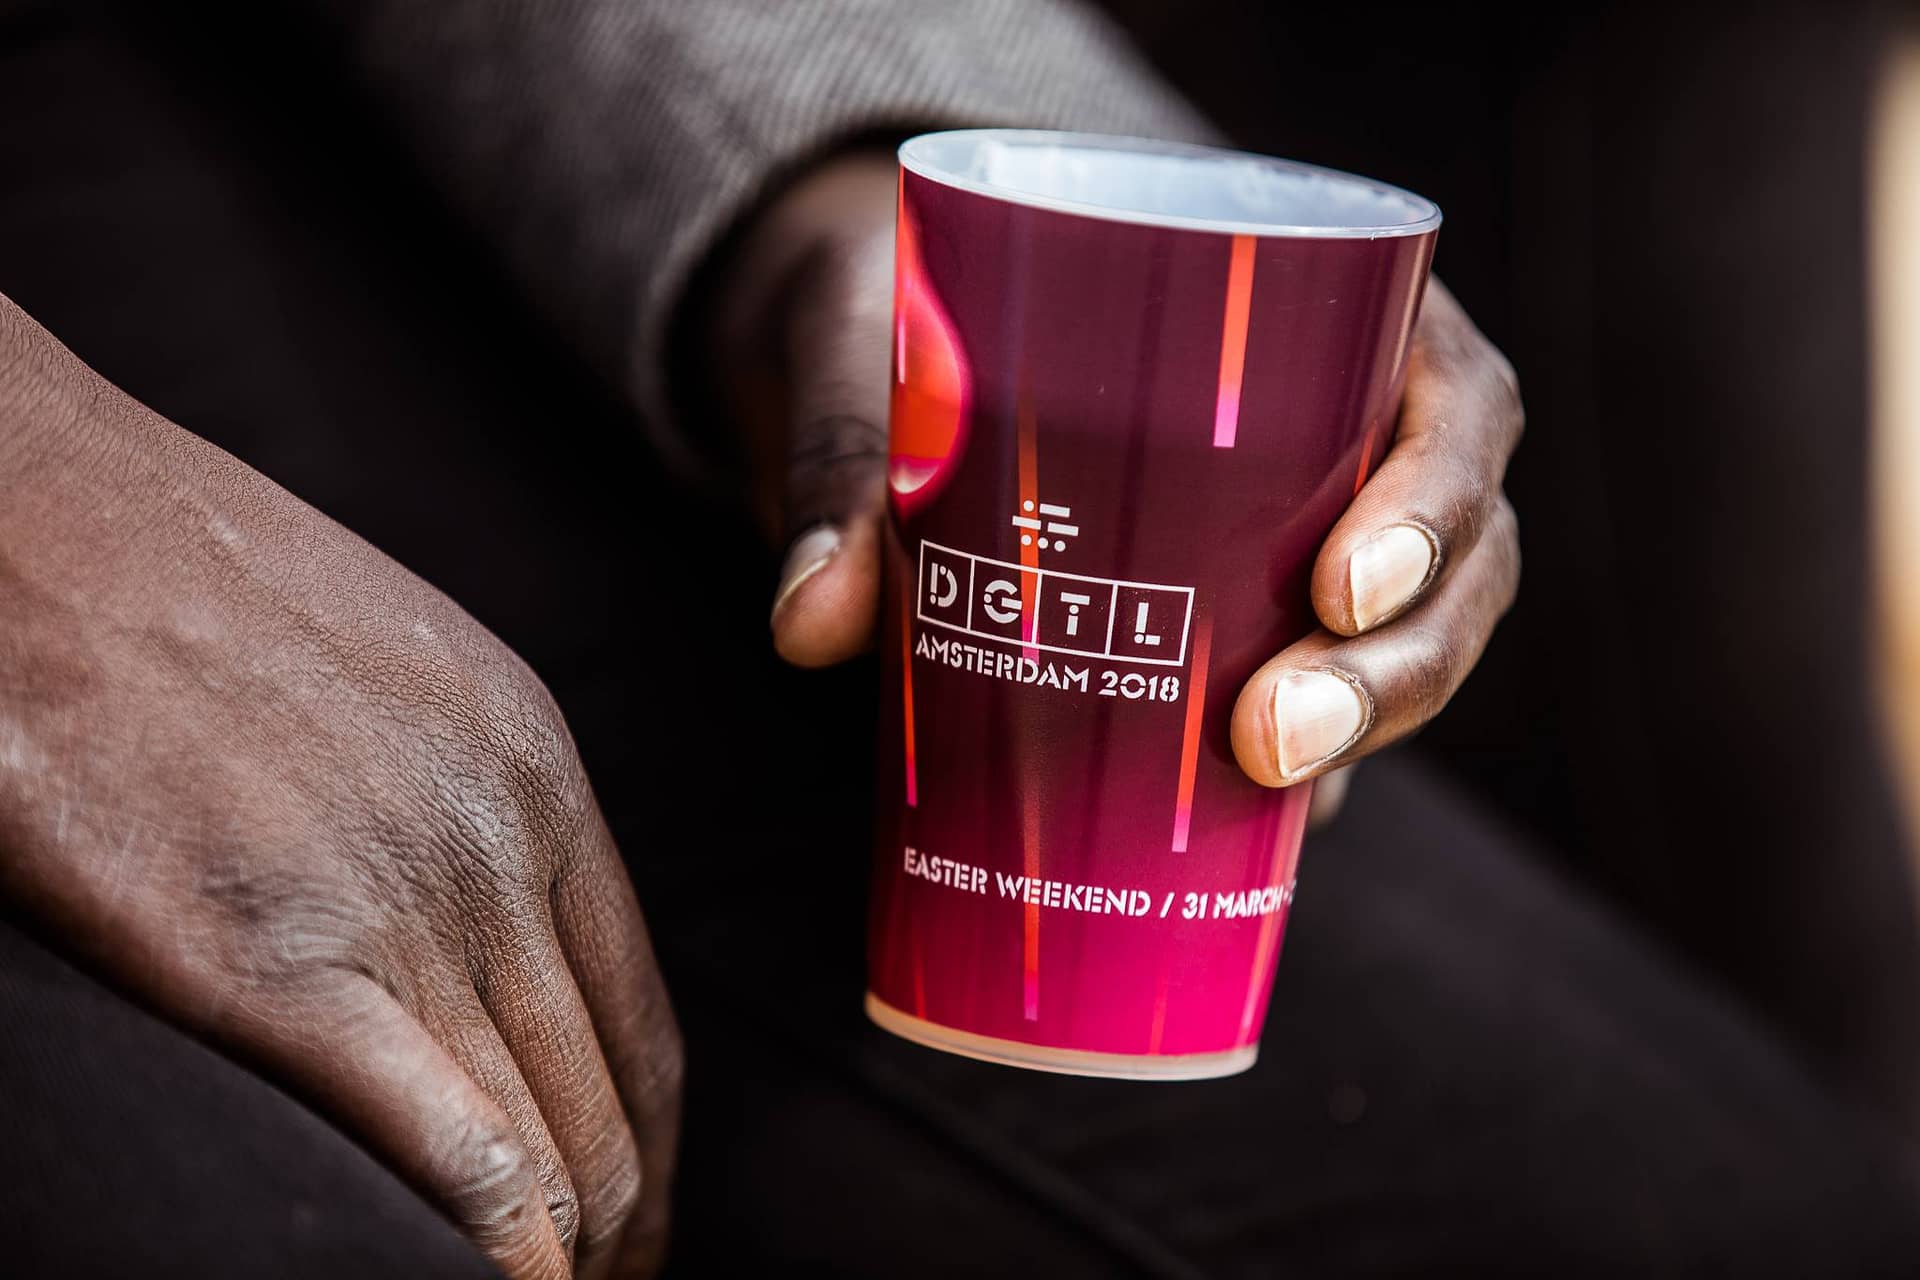 Festival goers are asked to pay a deposit for their cup, which incentivises them to return it instead of throwing a single-use cup on the ground after use. Photo by DGTL